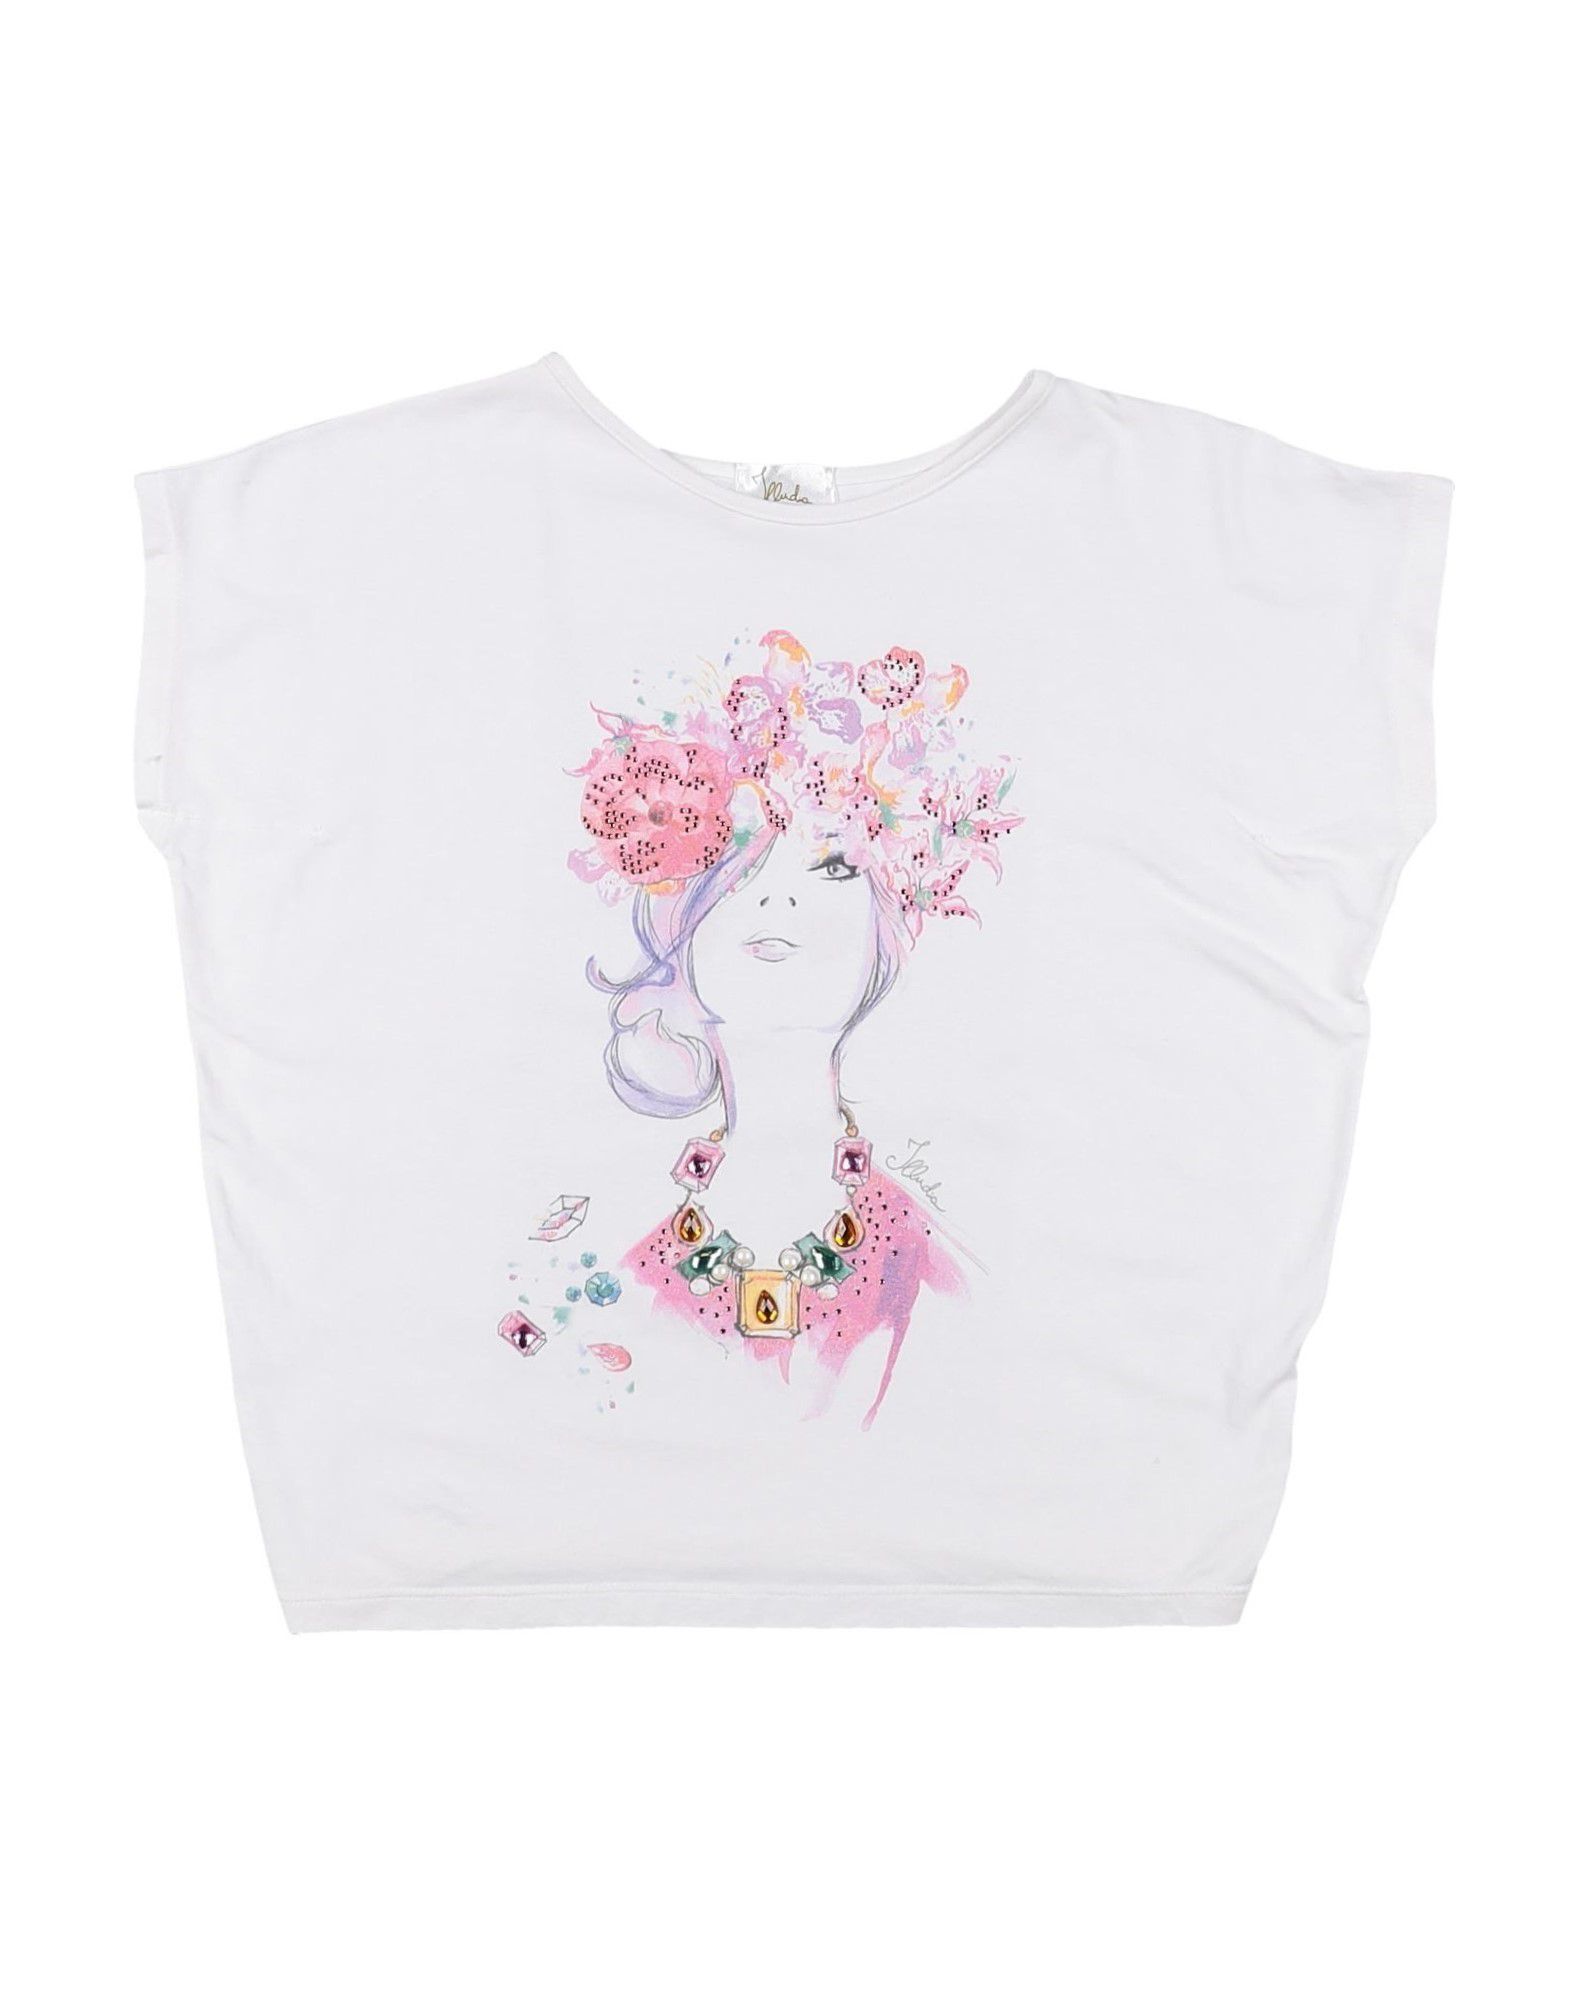 Illudia Kids' T-shirts In White